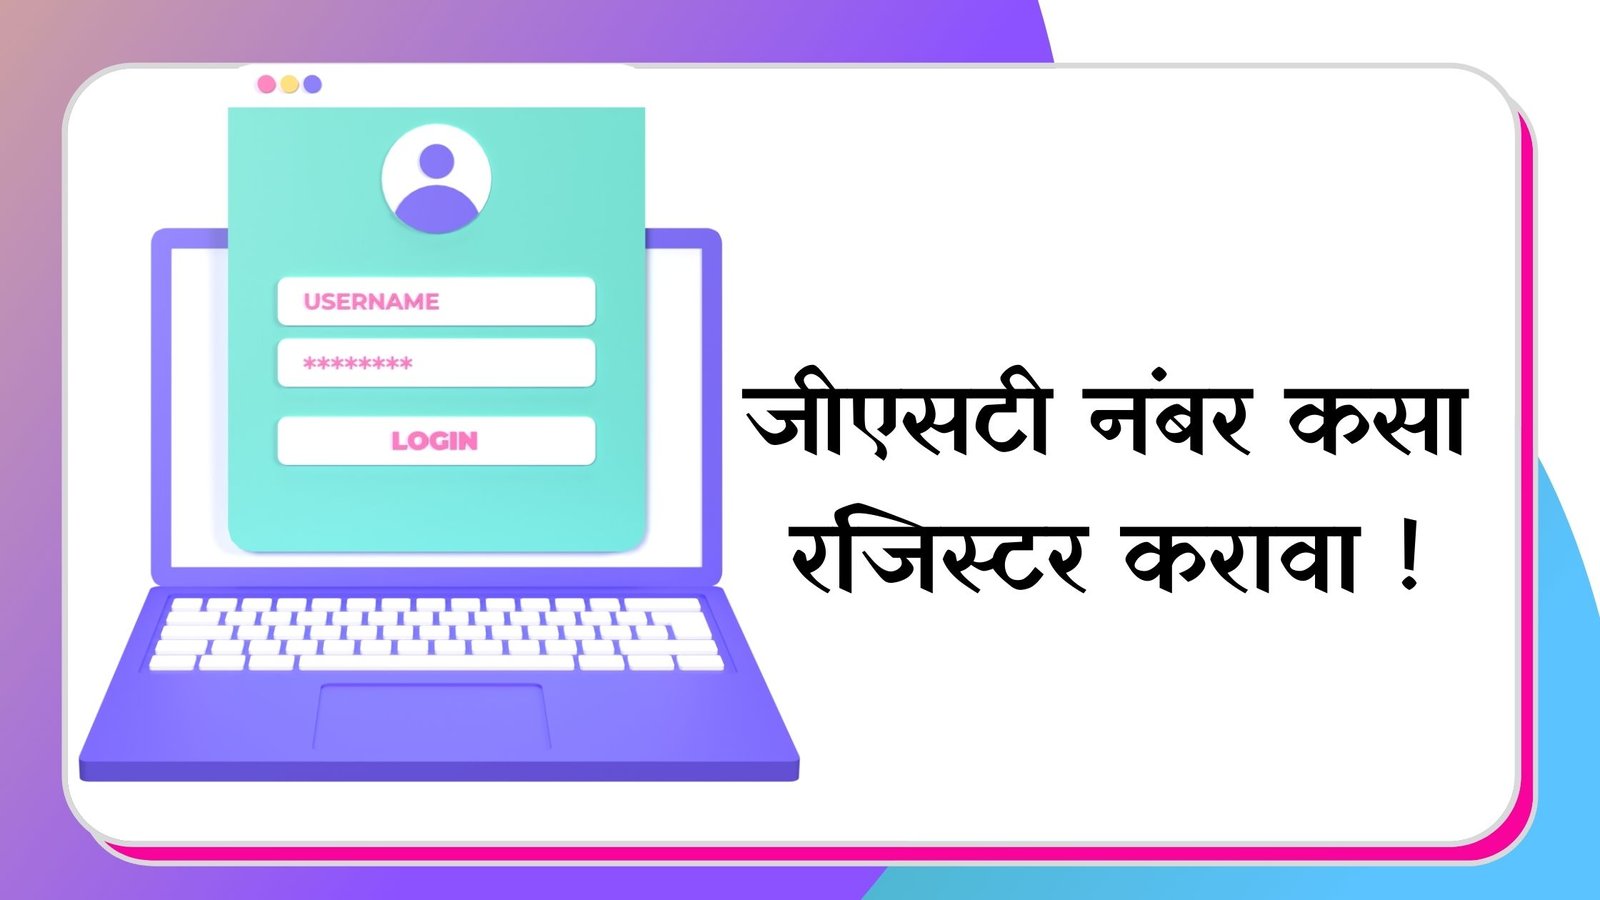 How To Register For GST Number in Marathi